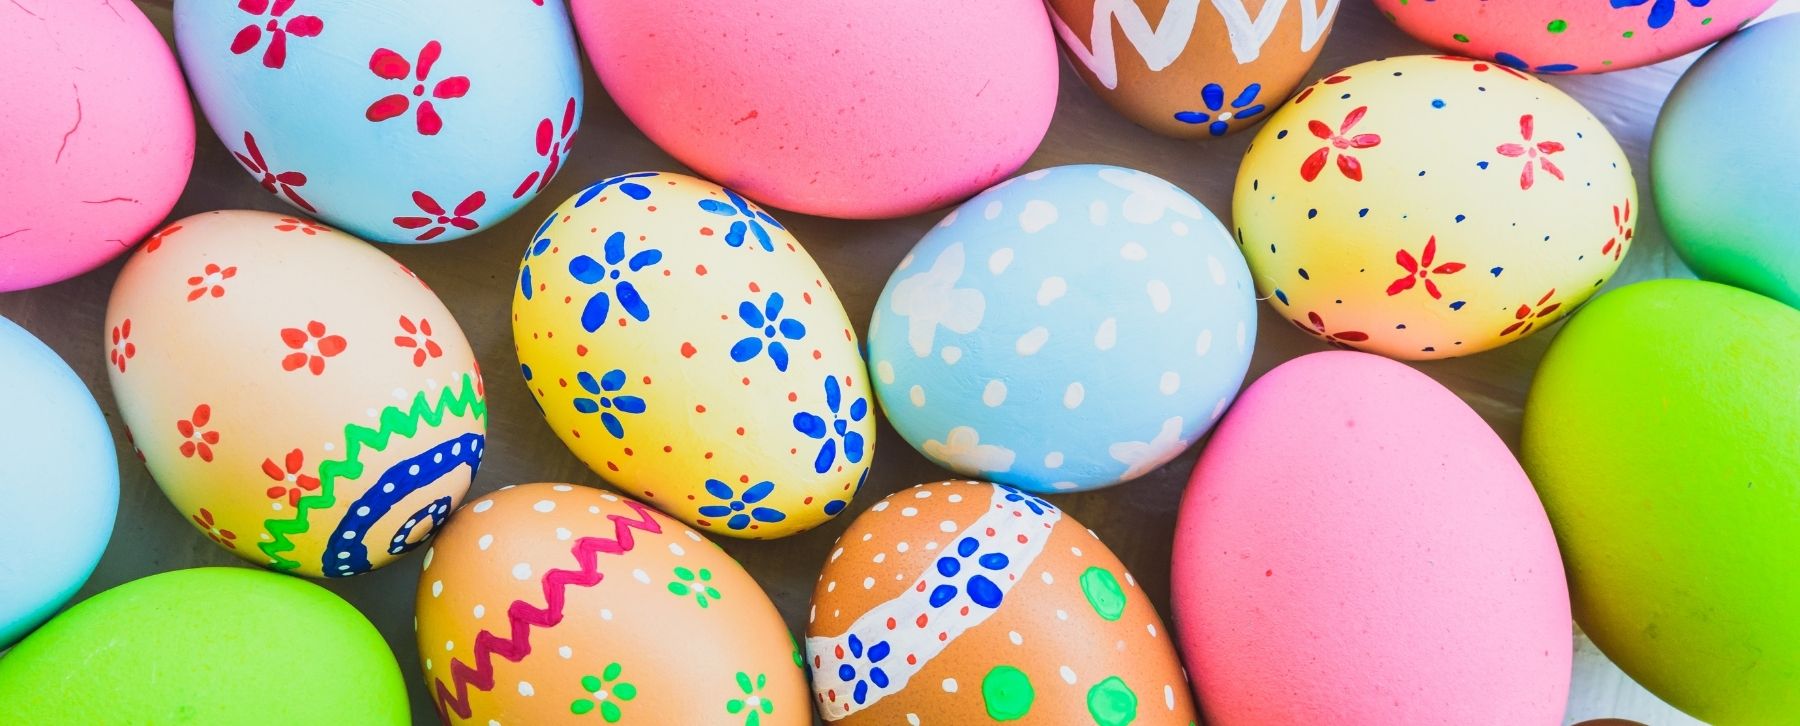 Celebrate Easter with These Charming Designs